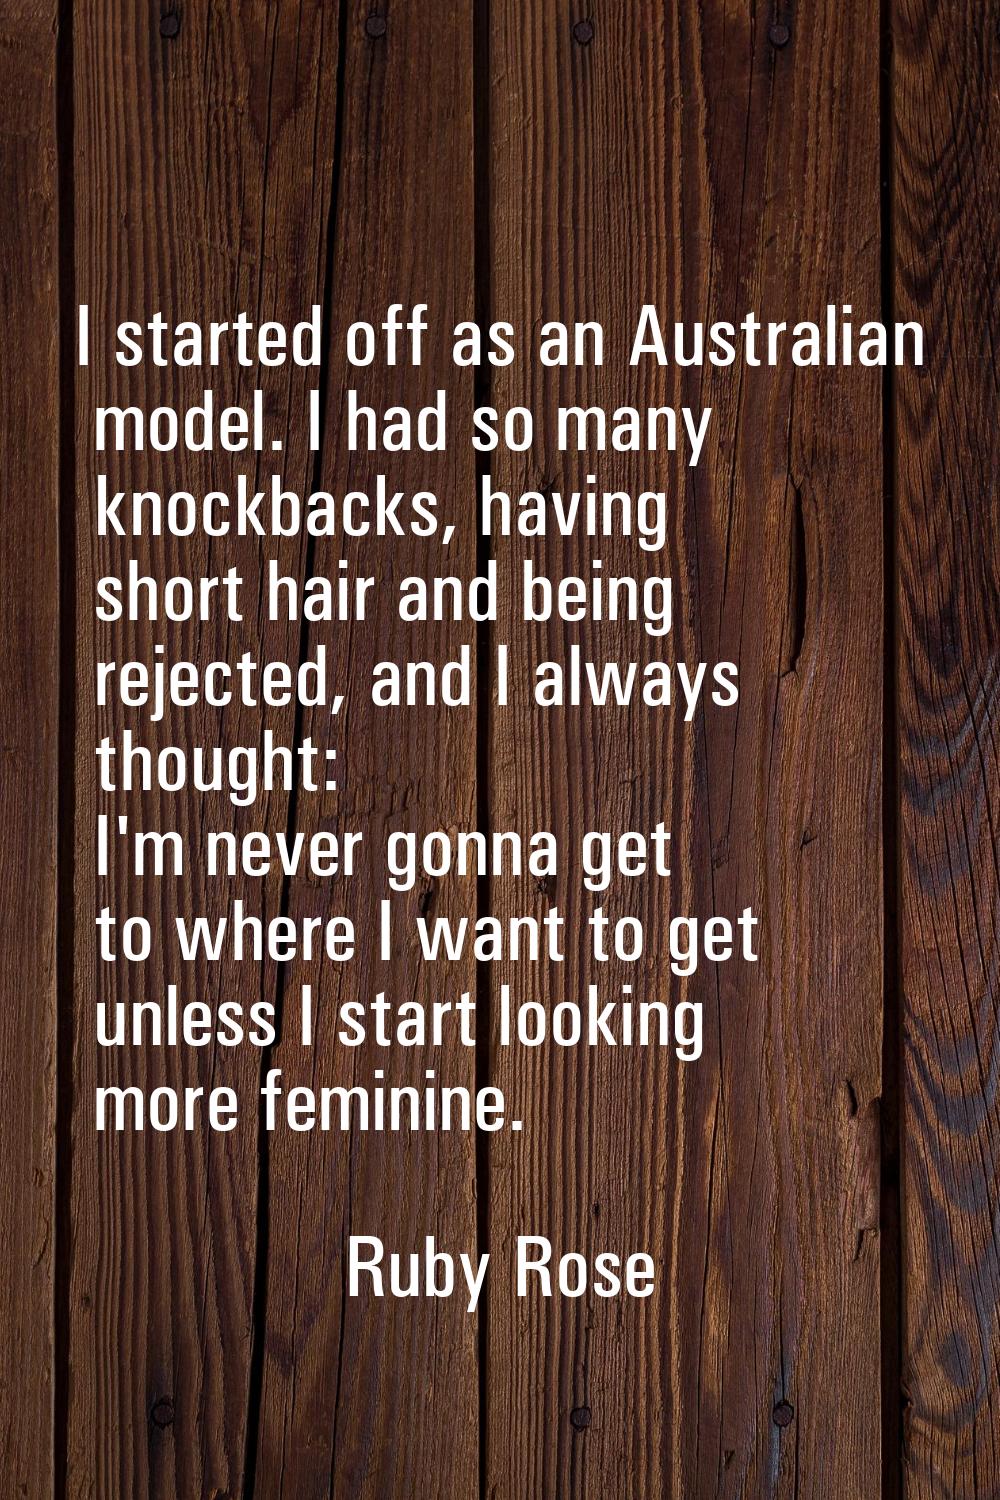 I started off as an Australian model. I had so many knockbacks, having short hair and being rejecte